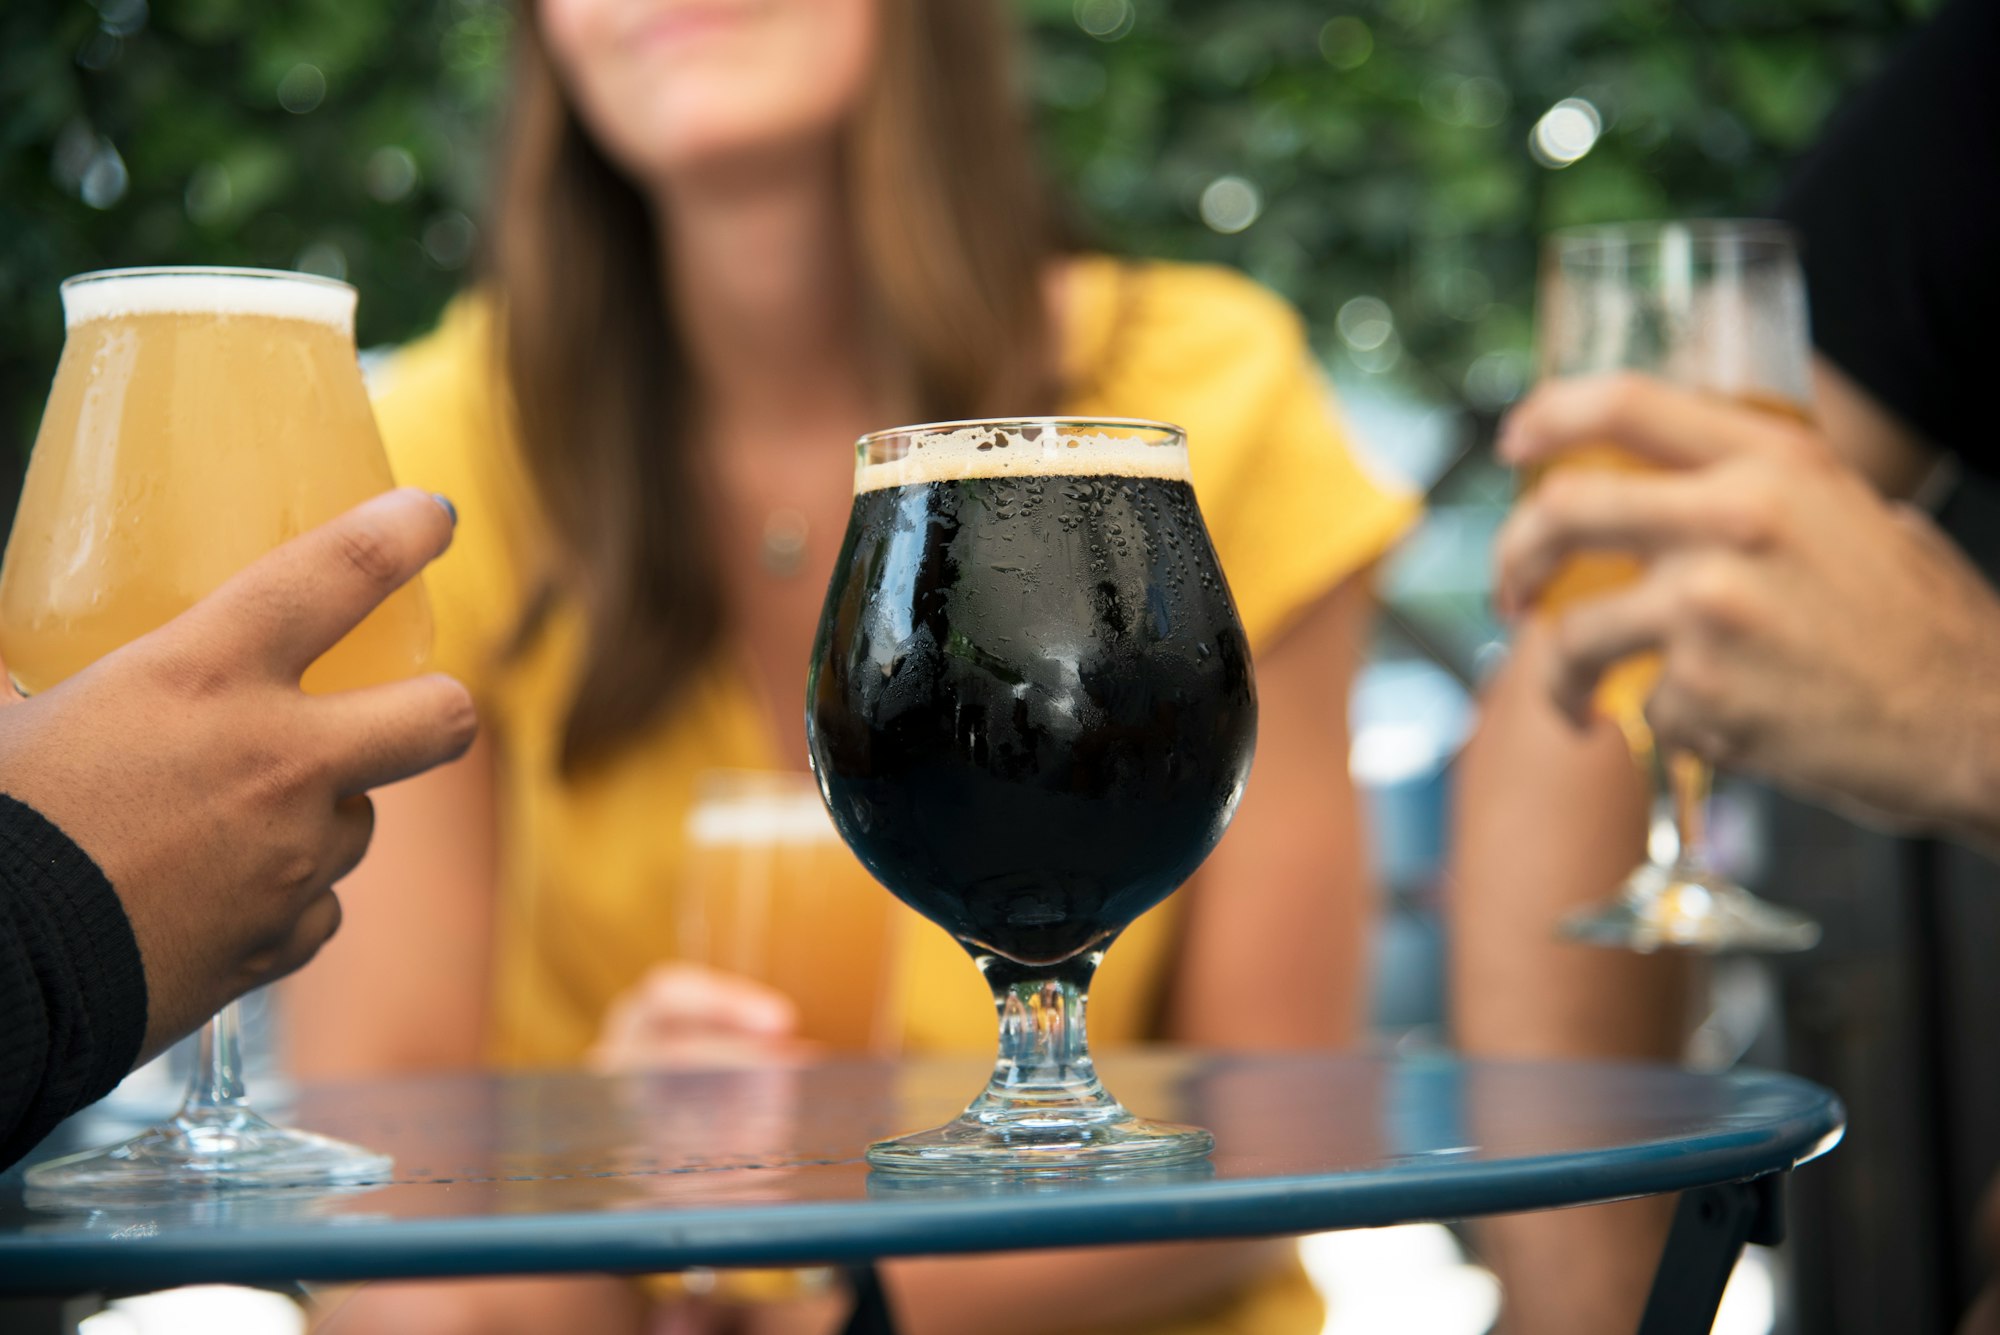 A beer glass on a table filled with a stout with people drinking lighter beer in the background.